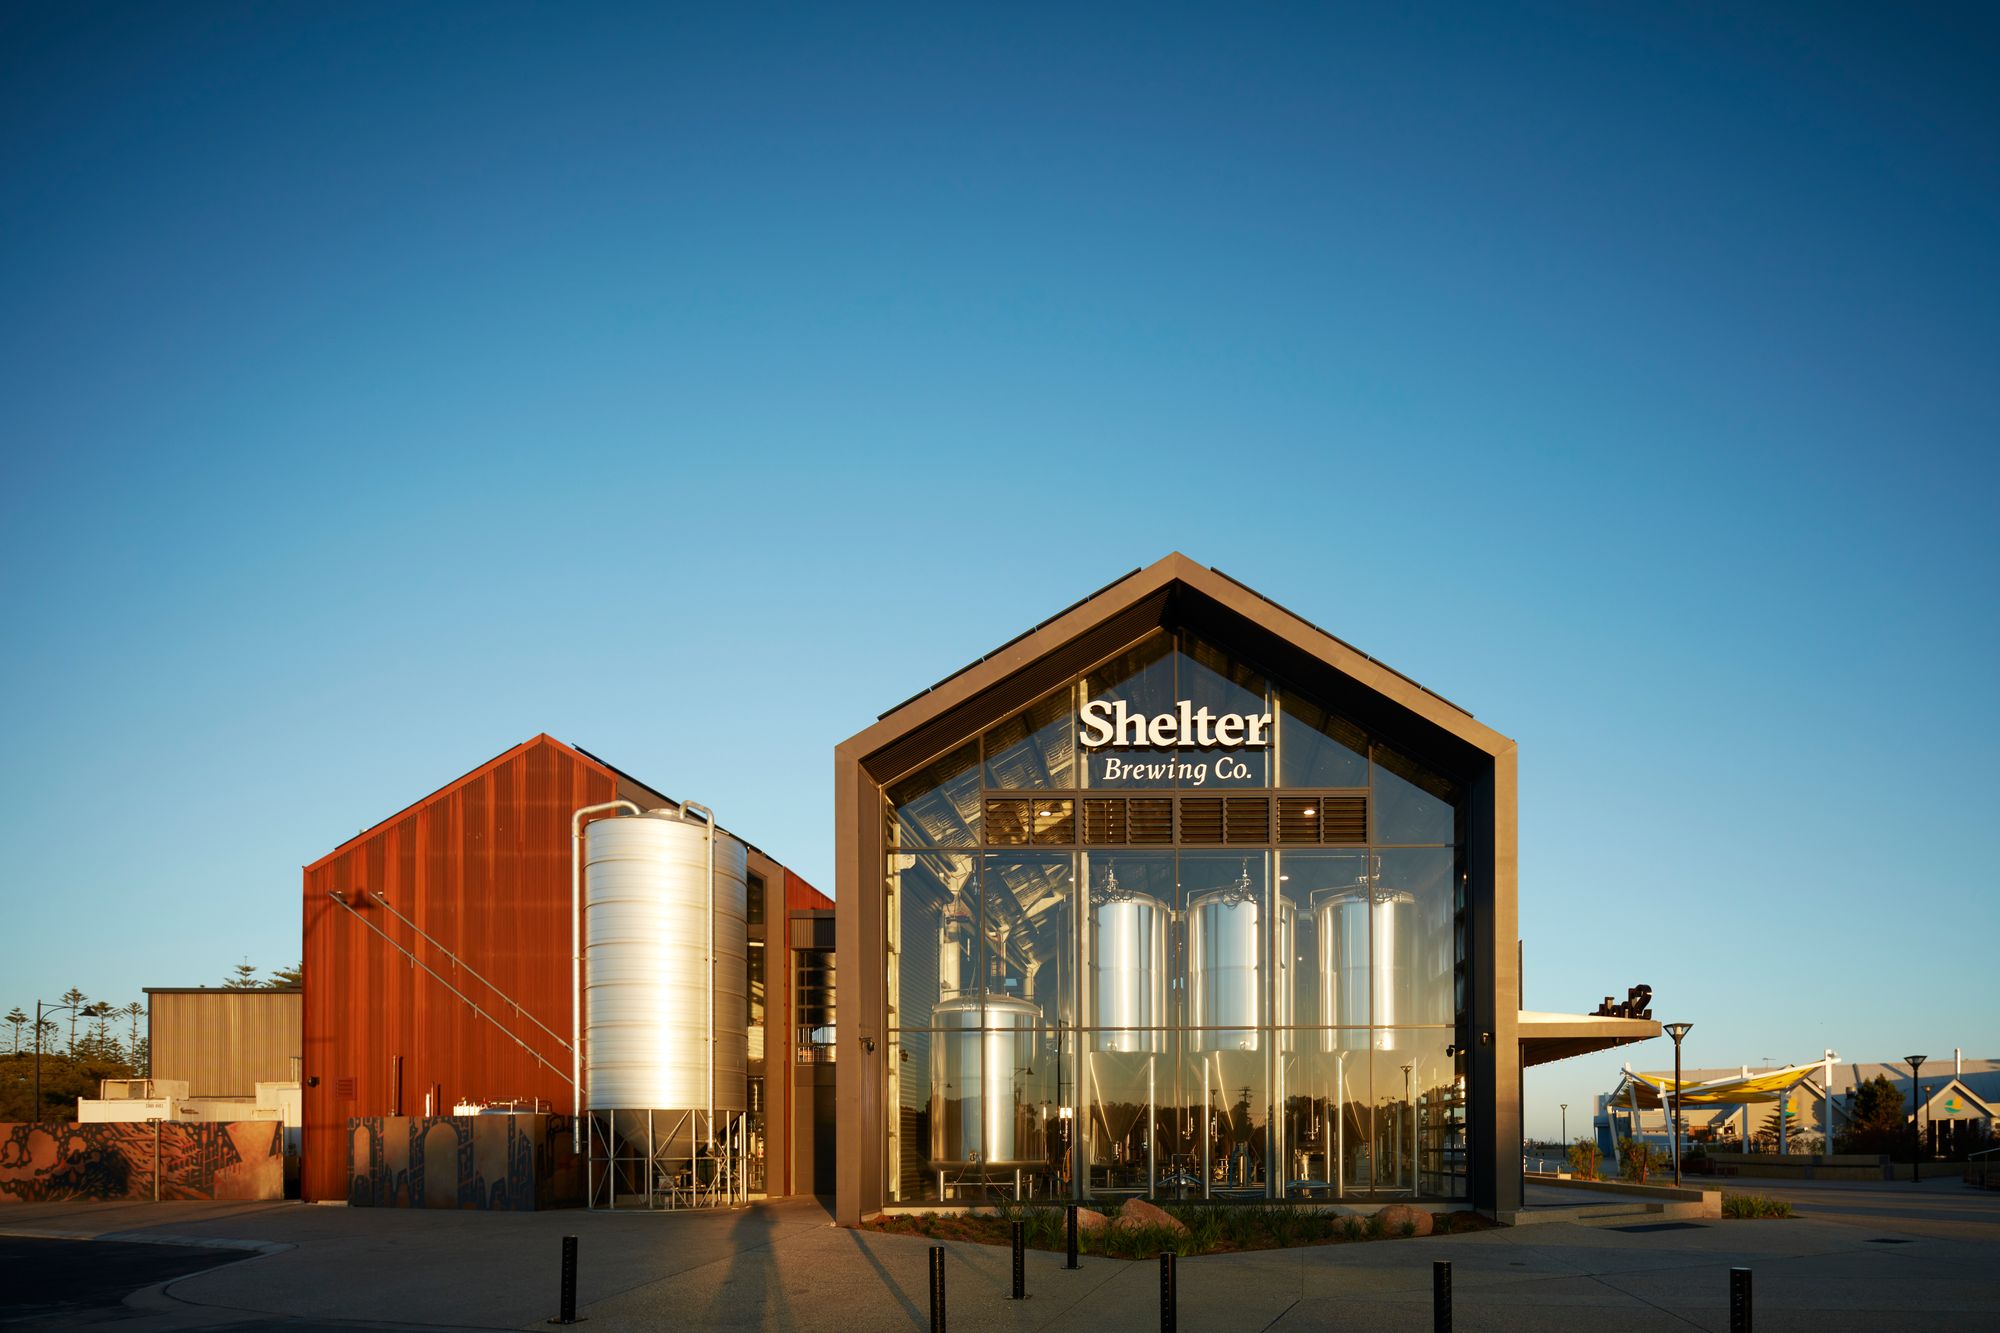 Shelter Brewing Co Photographer: Robert Frith